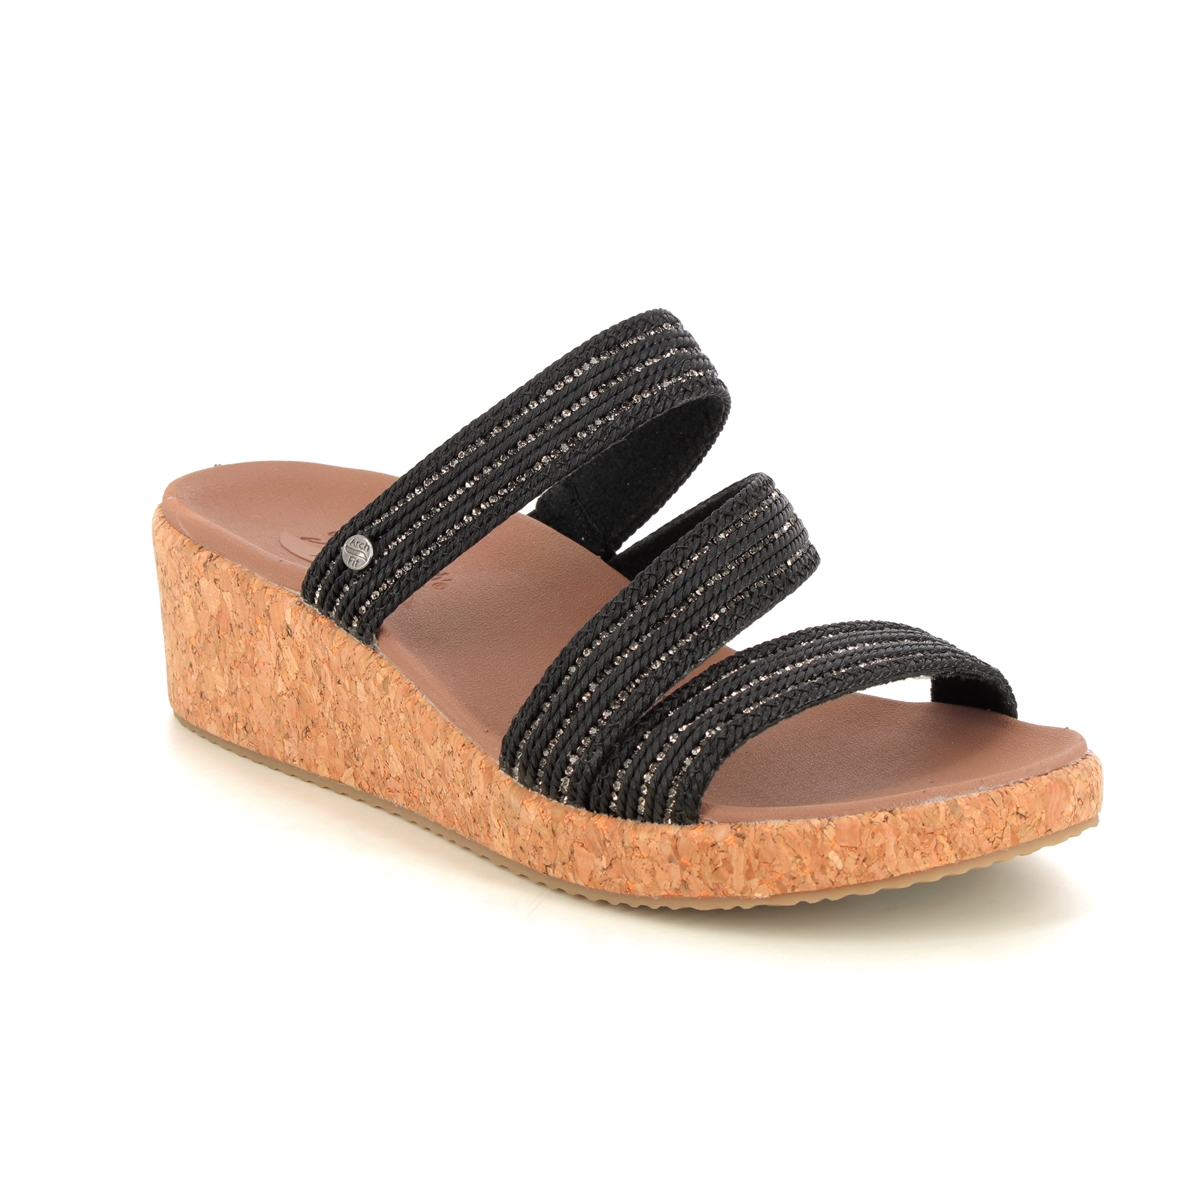 Skechers Arch Fit Beverlee BLK Black Womens Wedge Sandals 119548 in a Plain Textile in Size 6